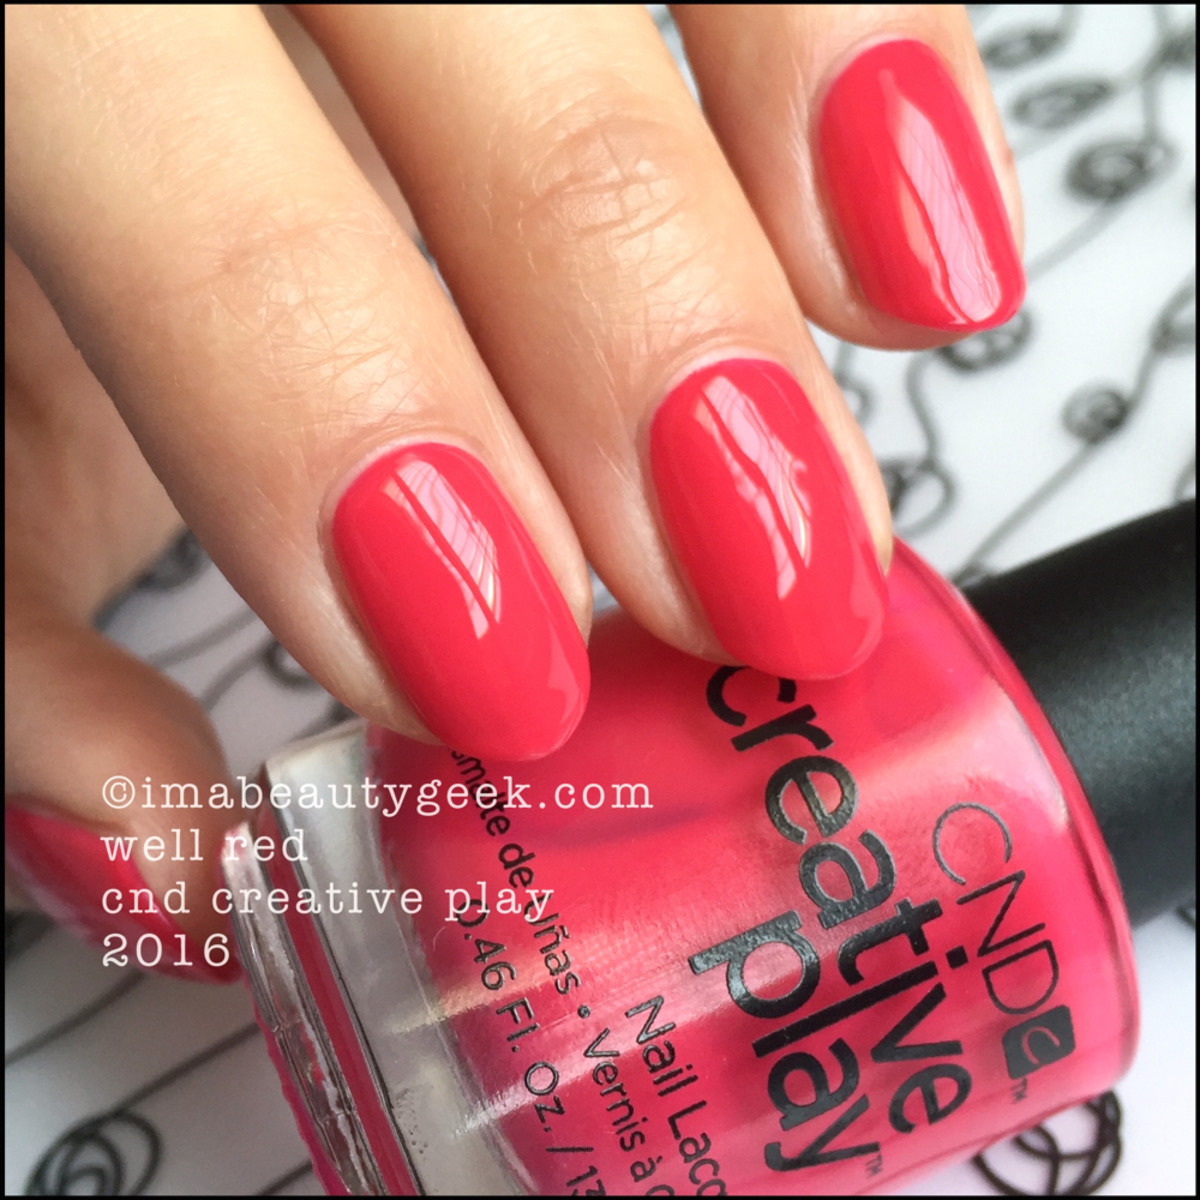 CND Creative Play Well Red_CND Creative Play Nail Polish Swatches 2016